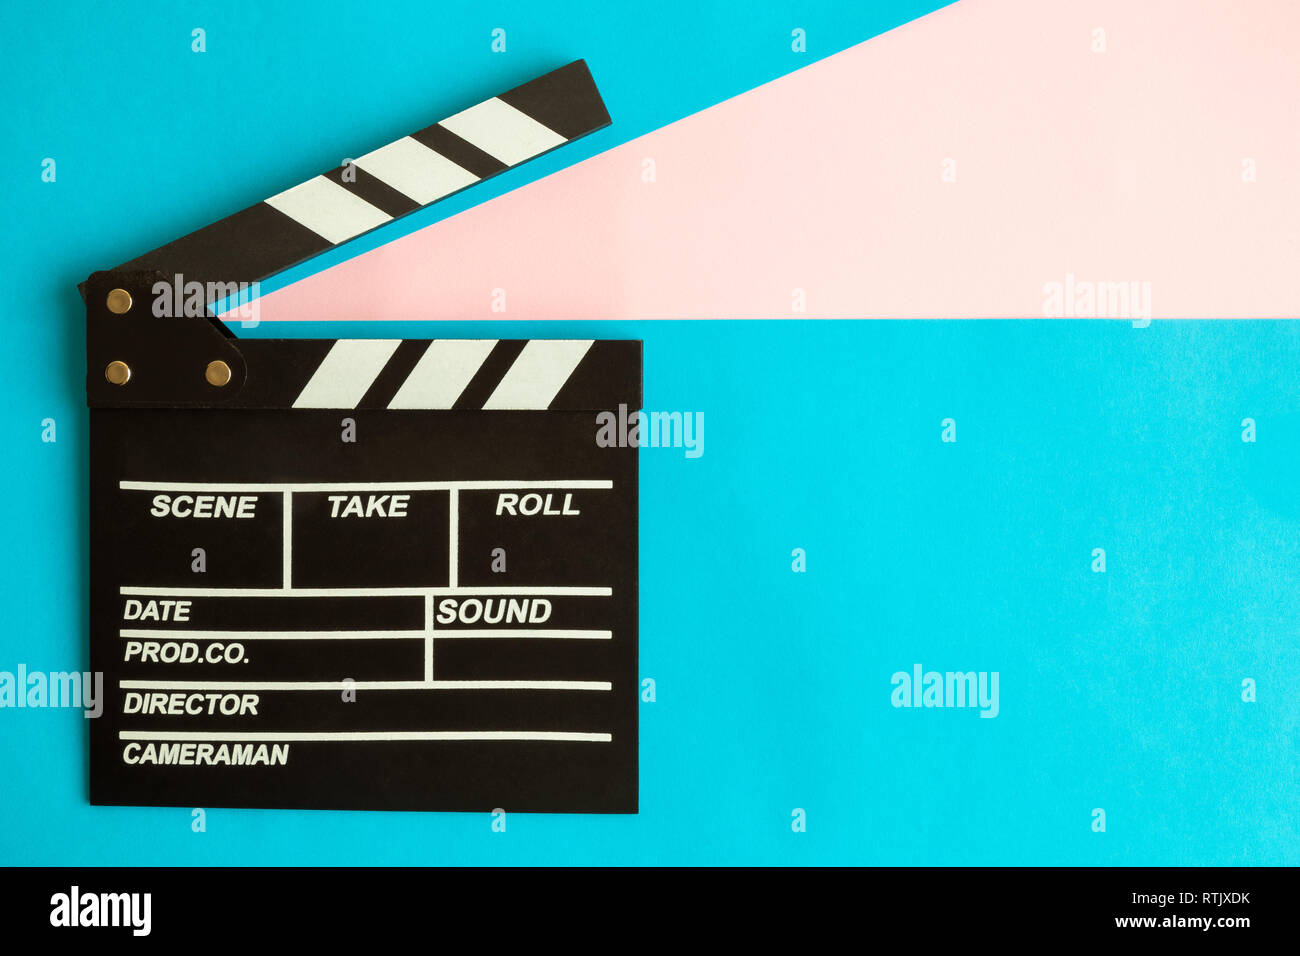 Clapper board on blue background minimal movie making and cinema film industry creative concept. Stock Photo